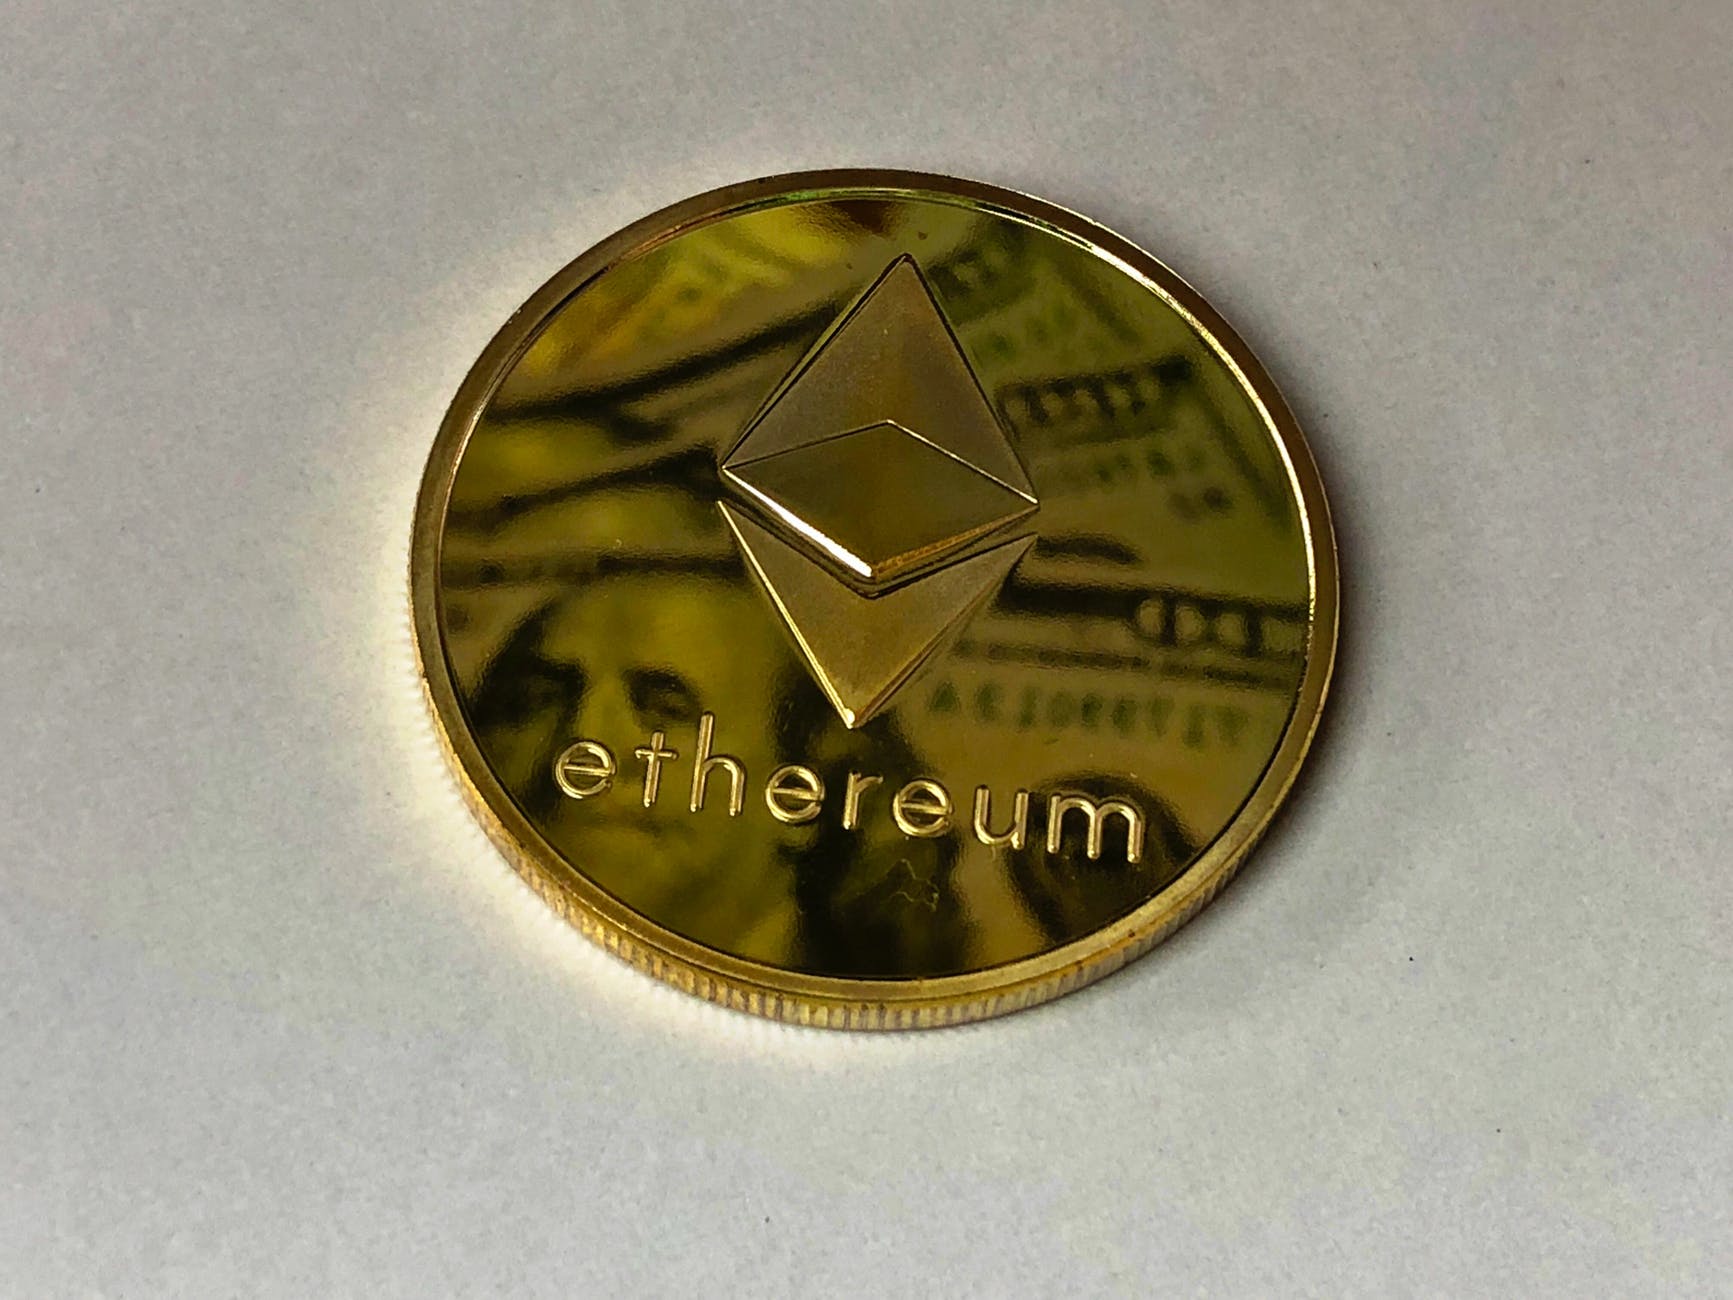 What’s going on with Ethereum?